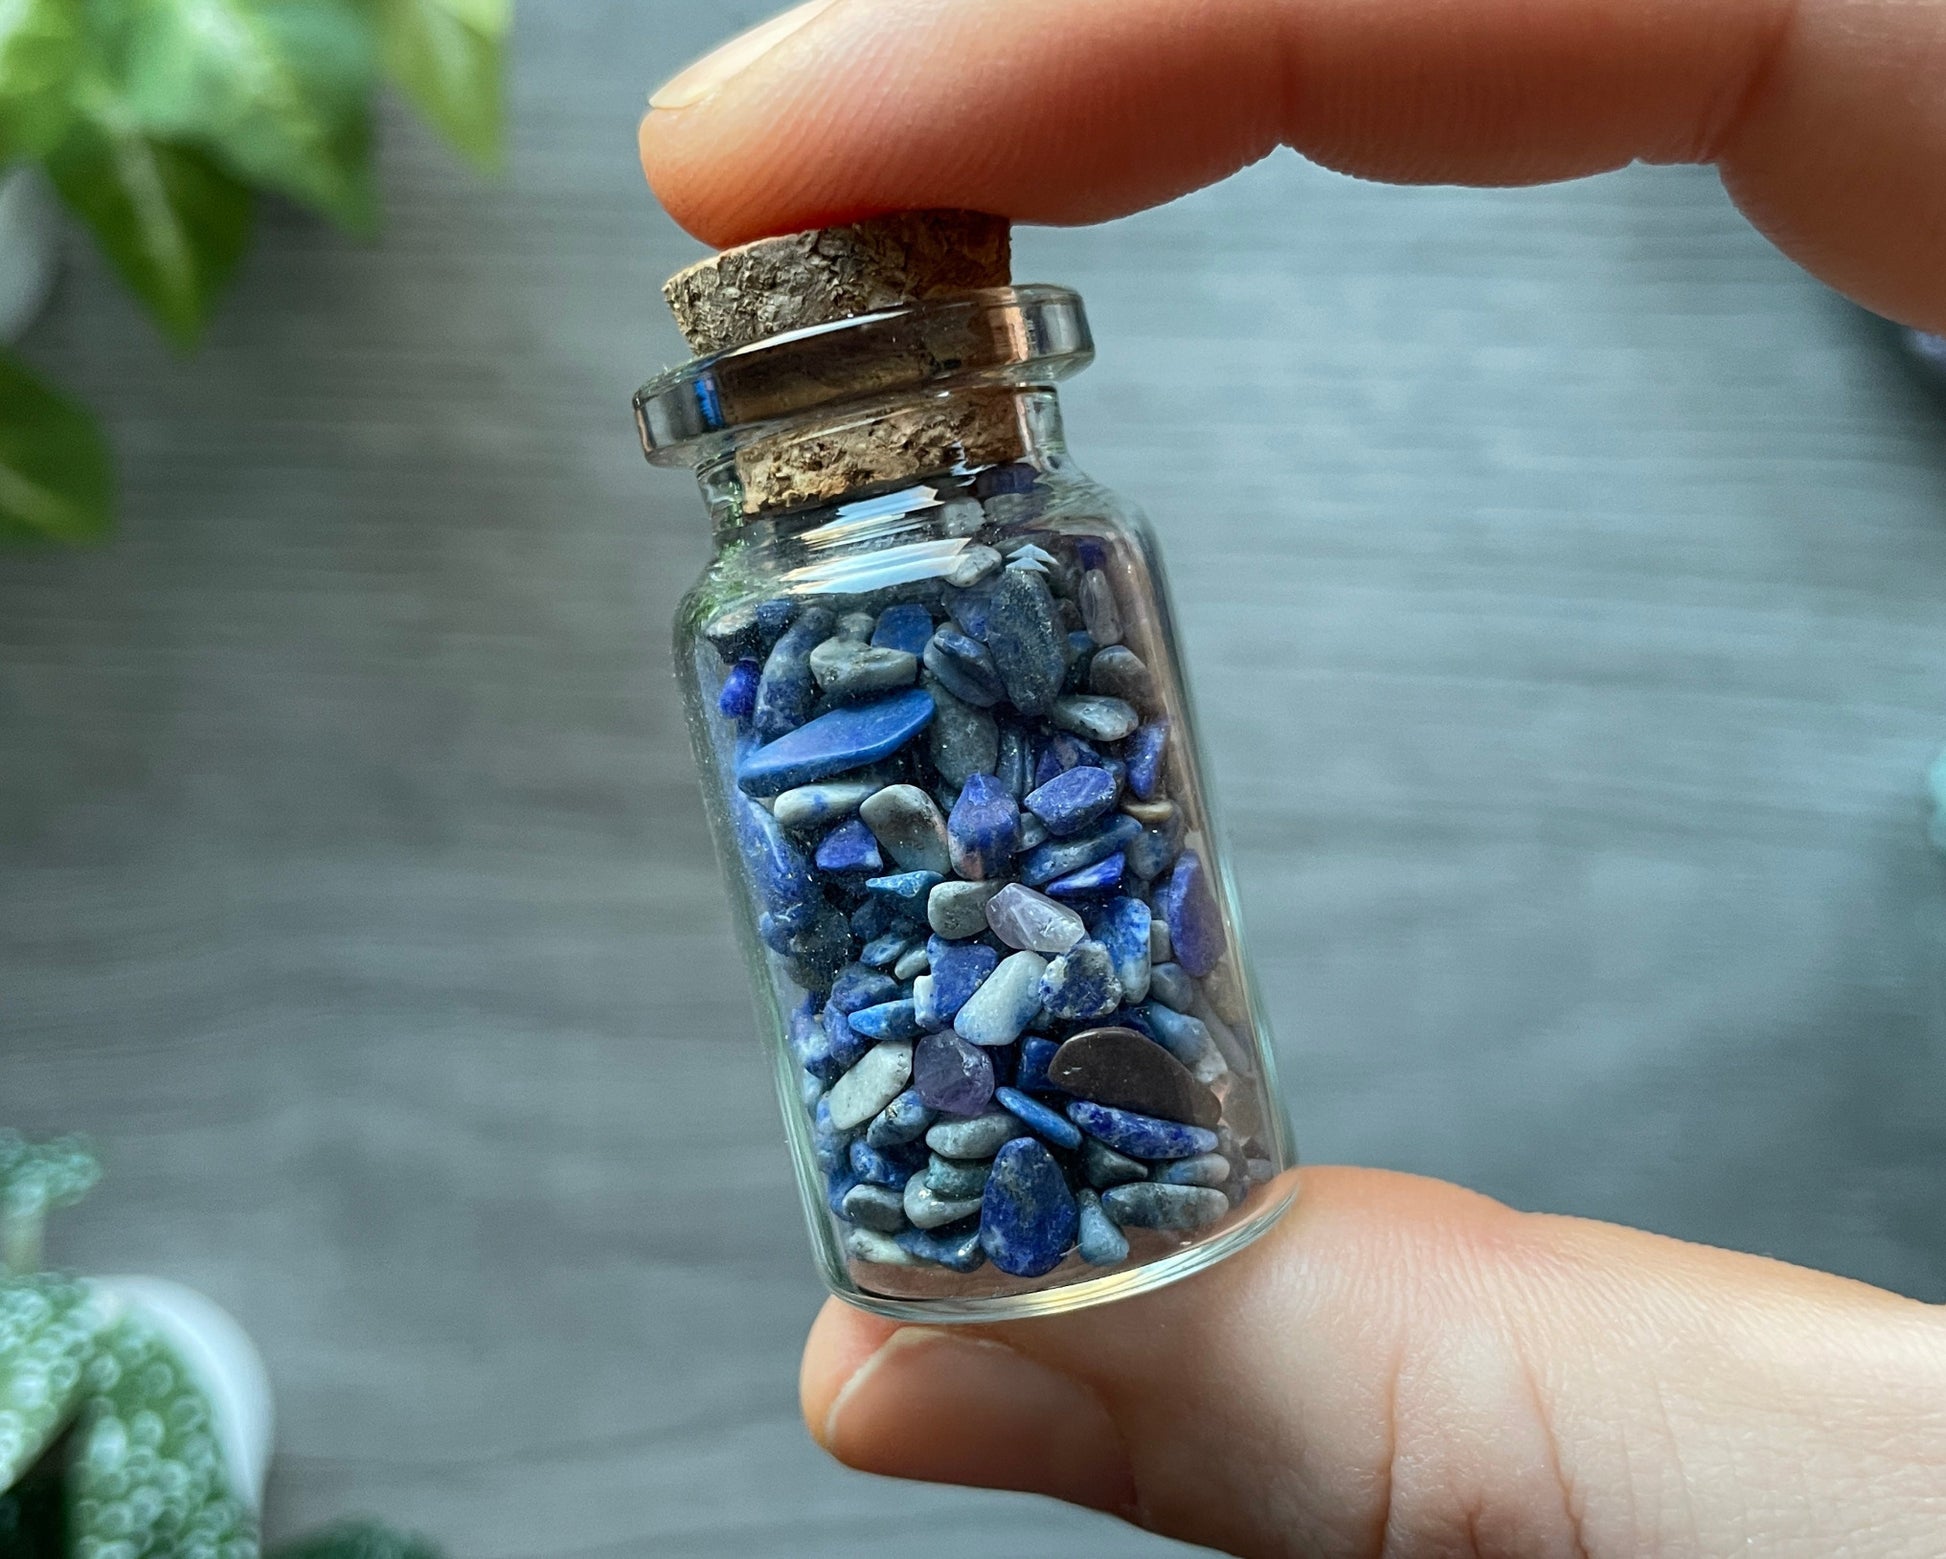 Pictured is a small glass vial with a cork stopper. Inside the jar are lapis lazuli chips.